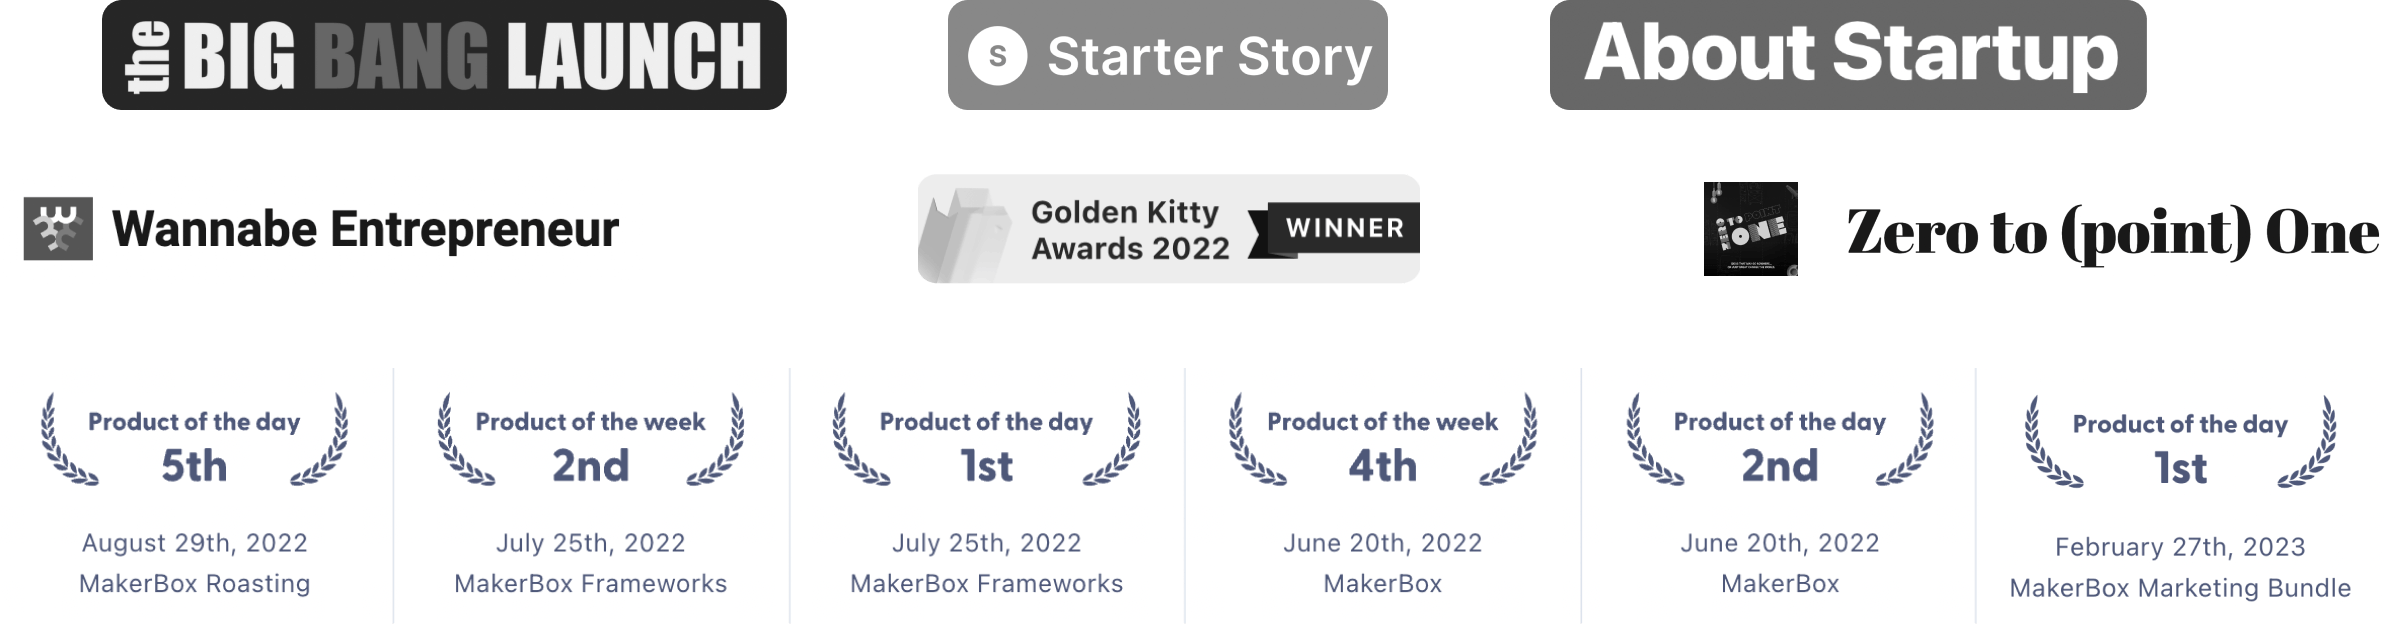 MakerBox is featured in